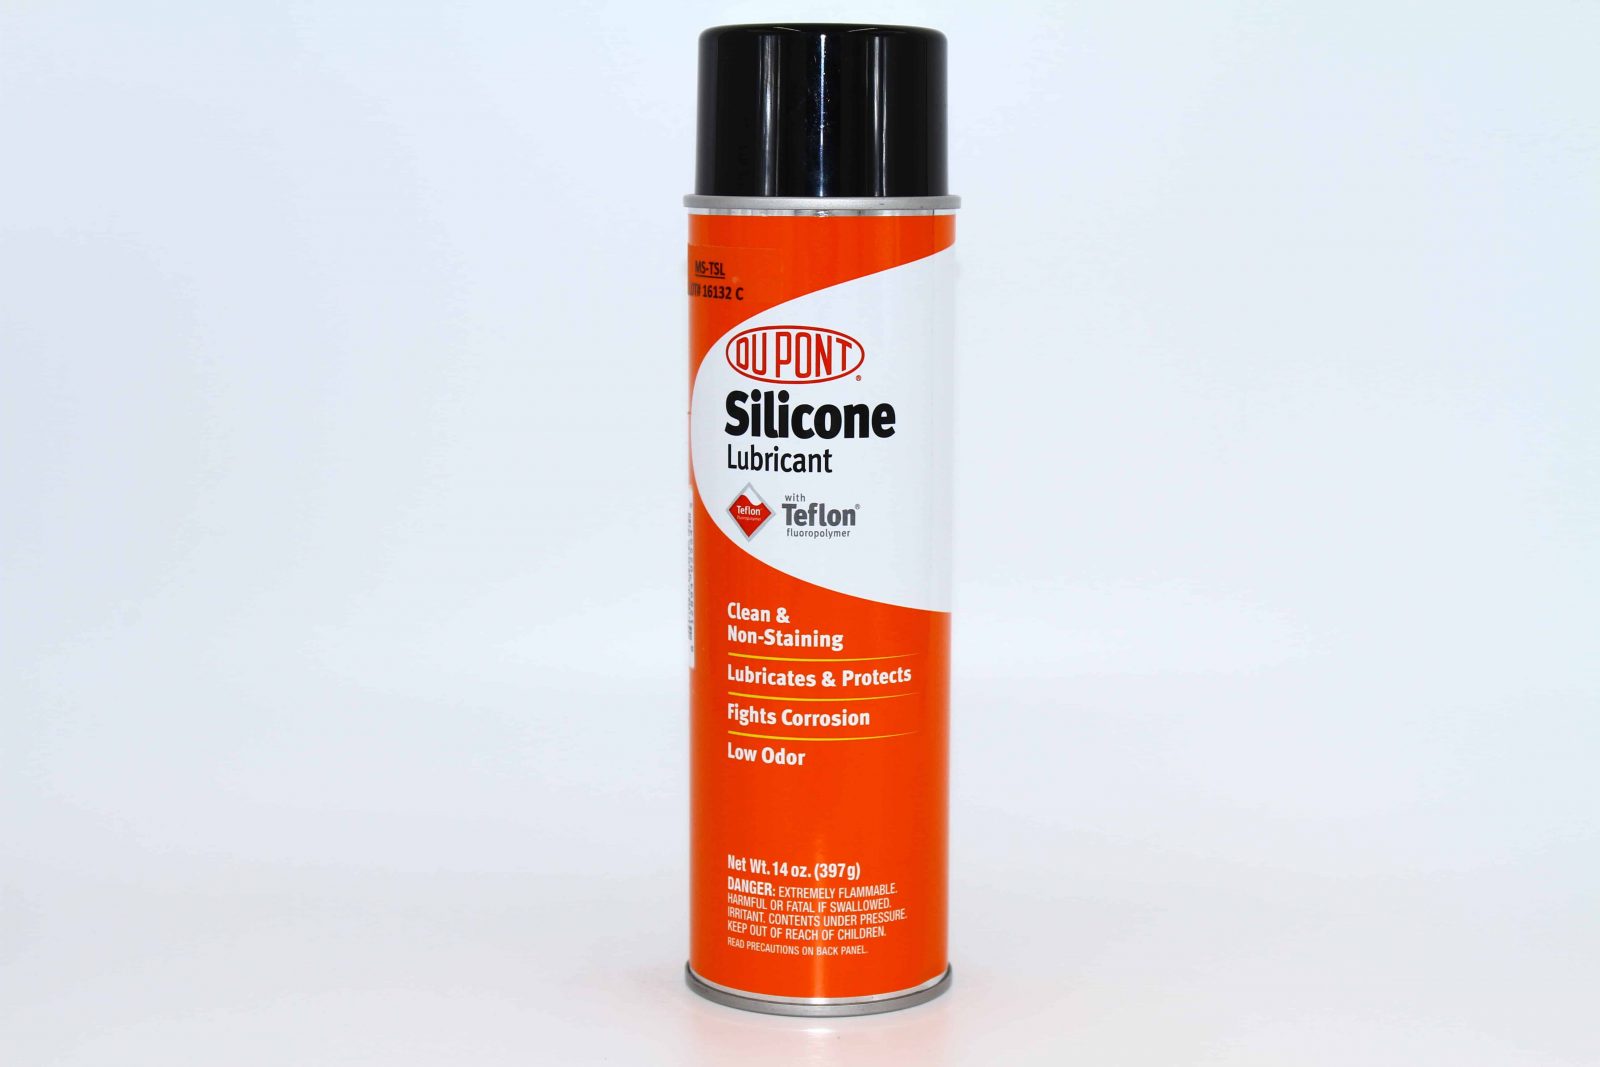 Buy cold spray and silicone spray for stainless steel surfaces